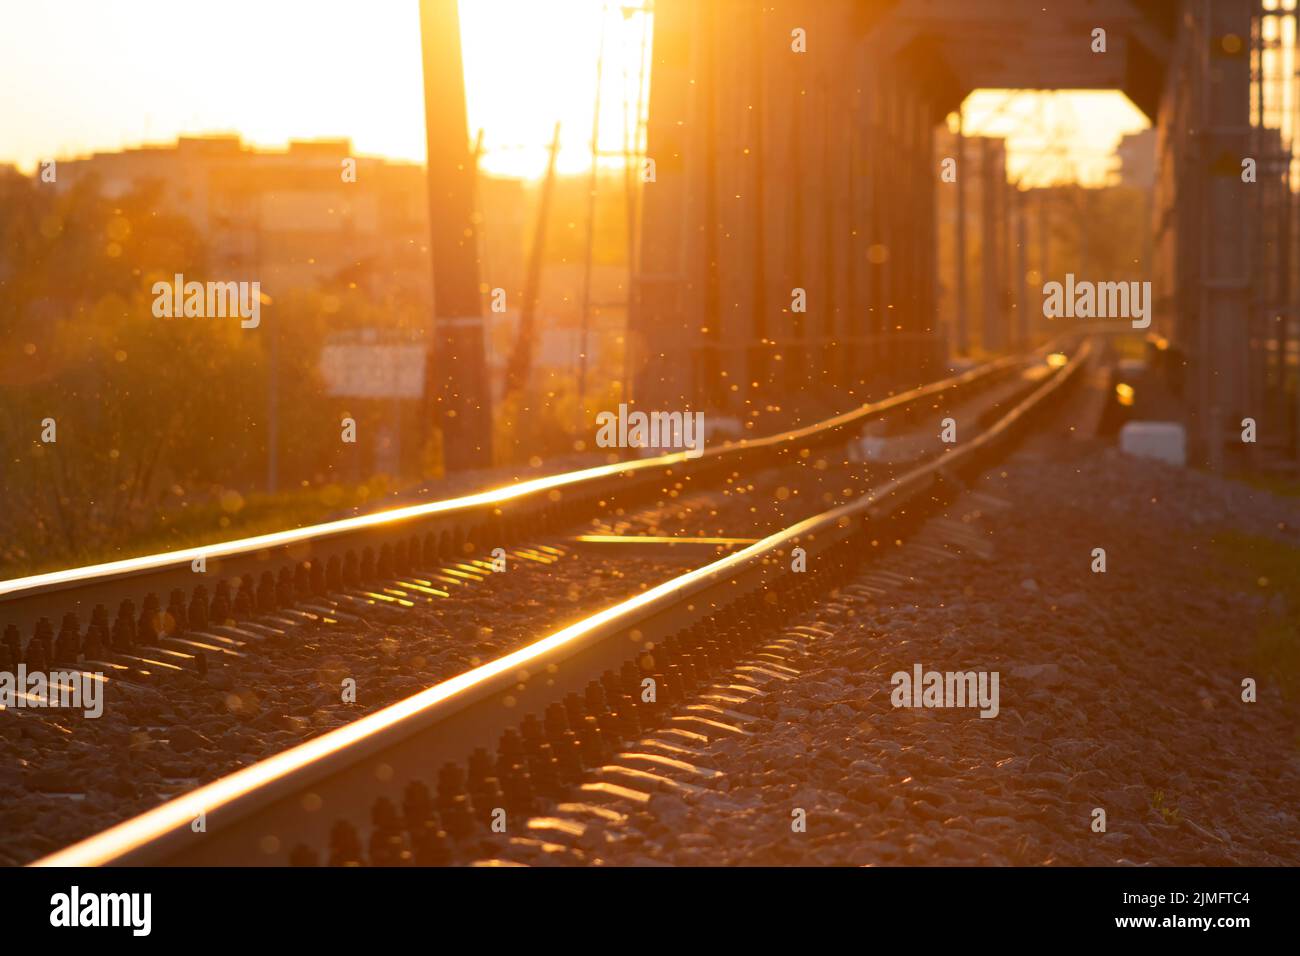 Dust in the air, blur background of railway tracks and bridge. Stock Photo